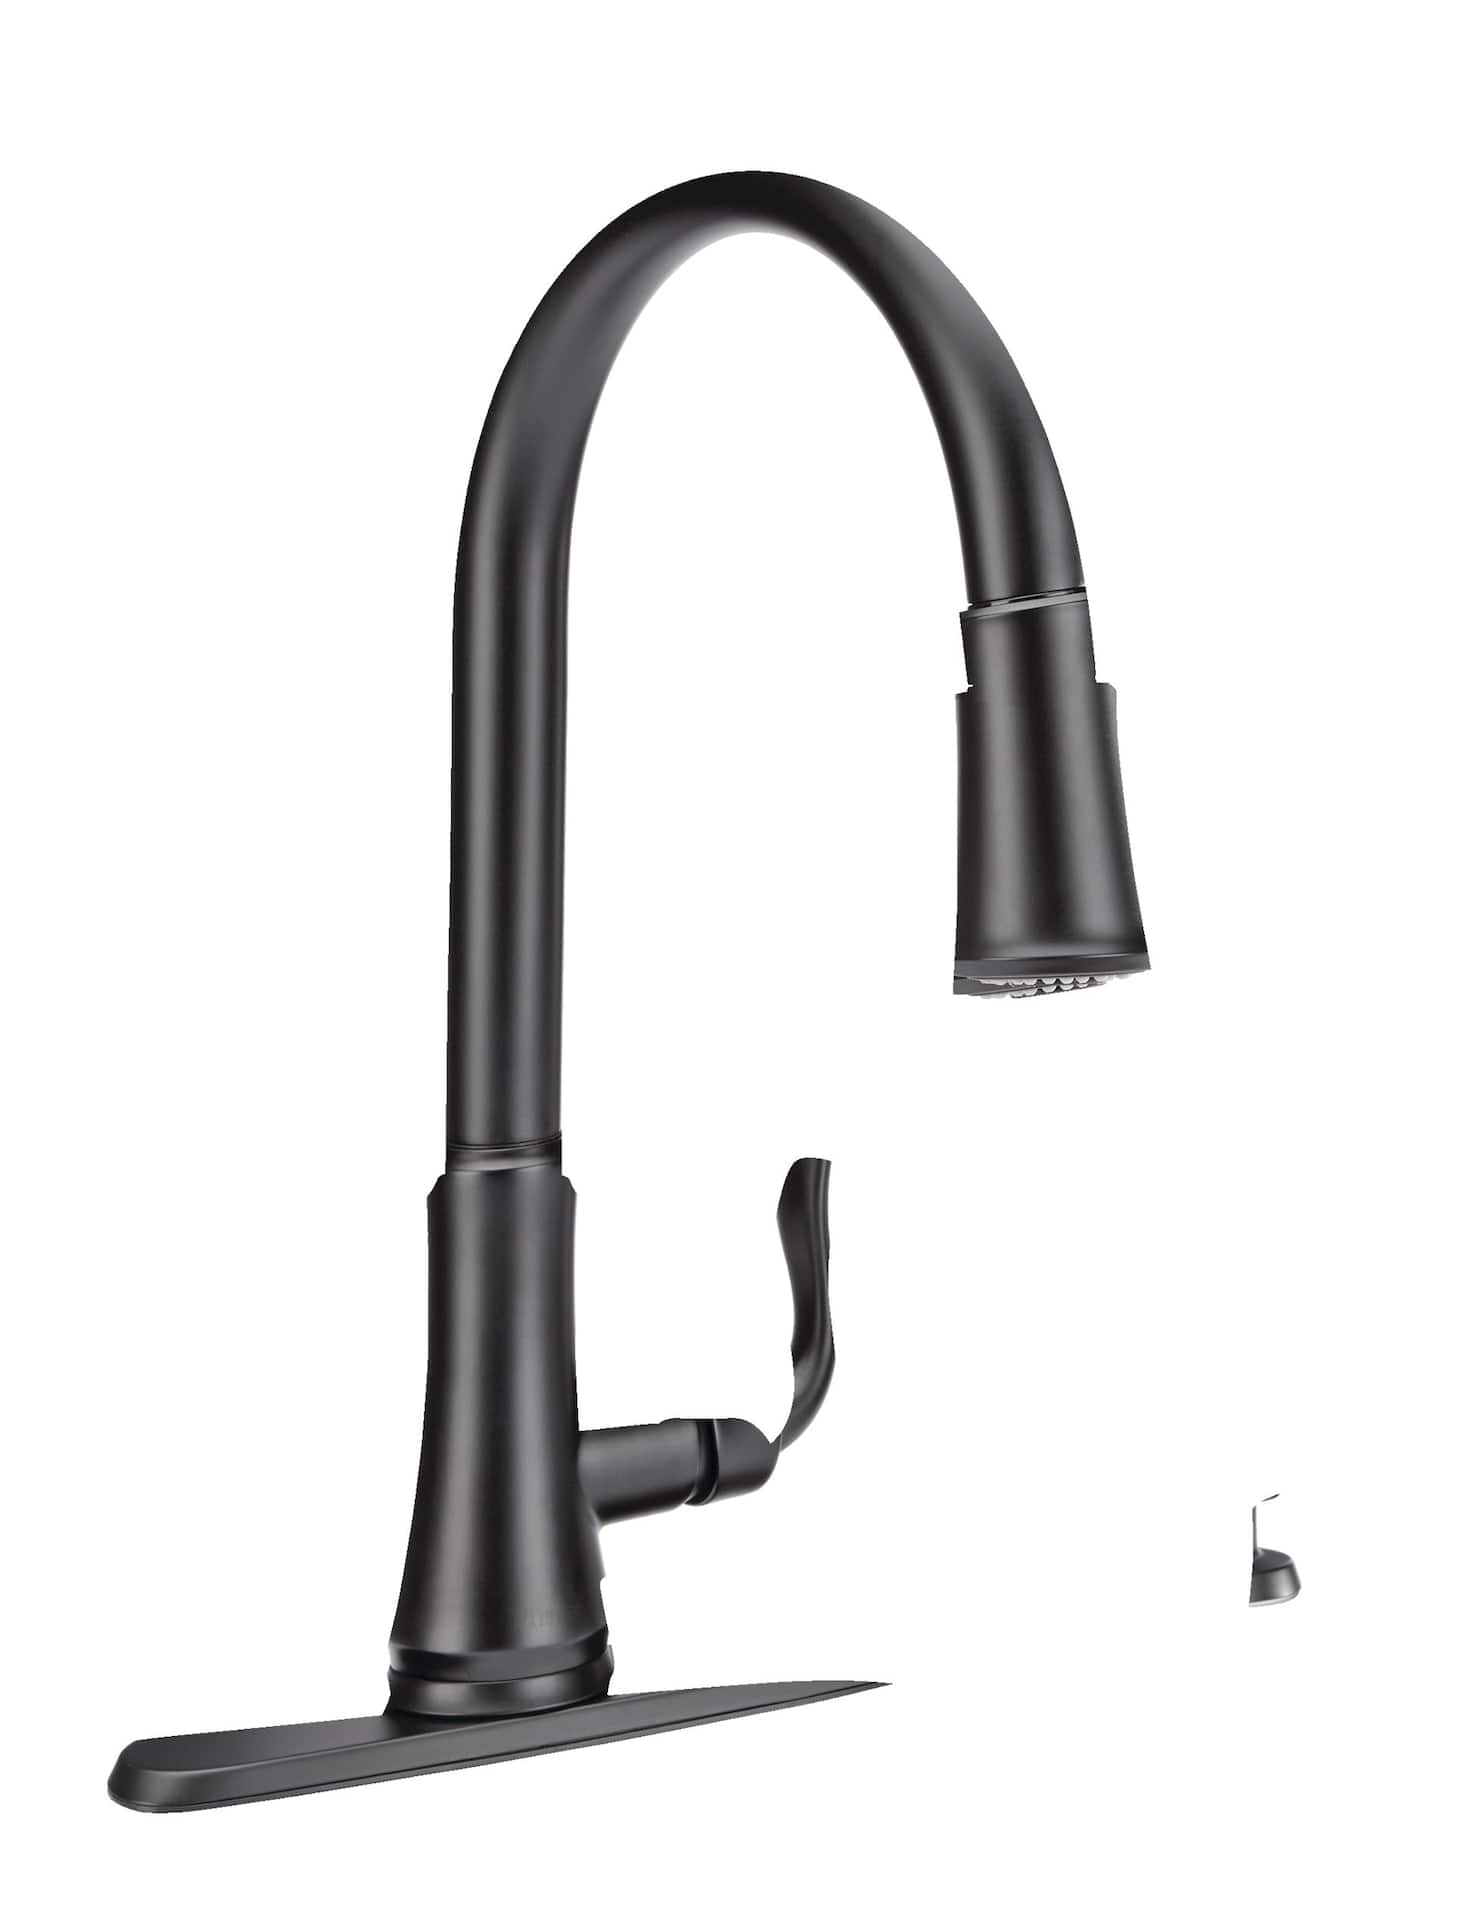 Pfister Cagney Single Handle High Arc Pull Down Kitchen Faucet